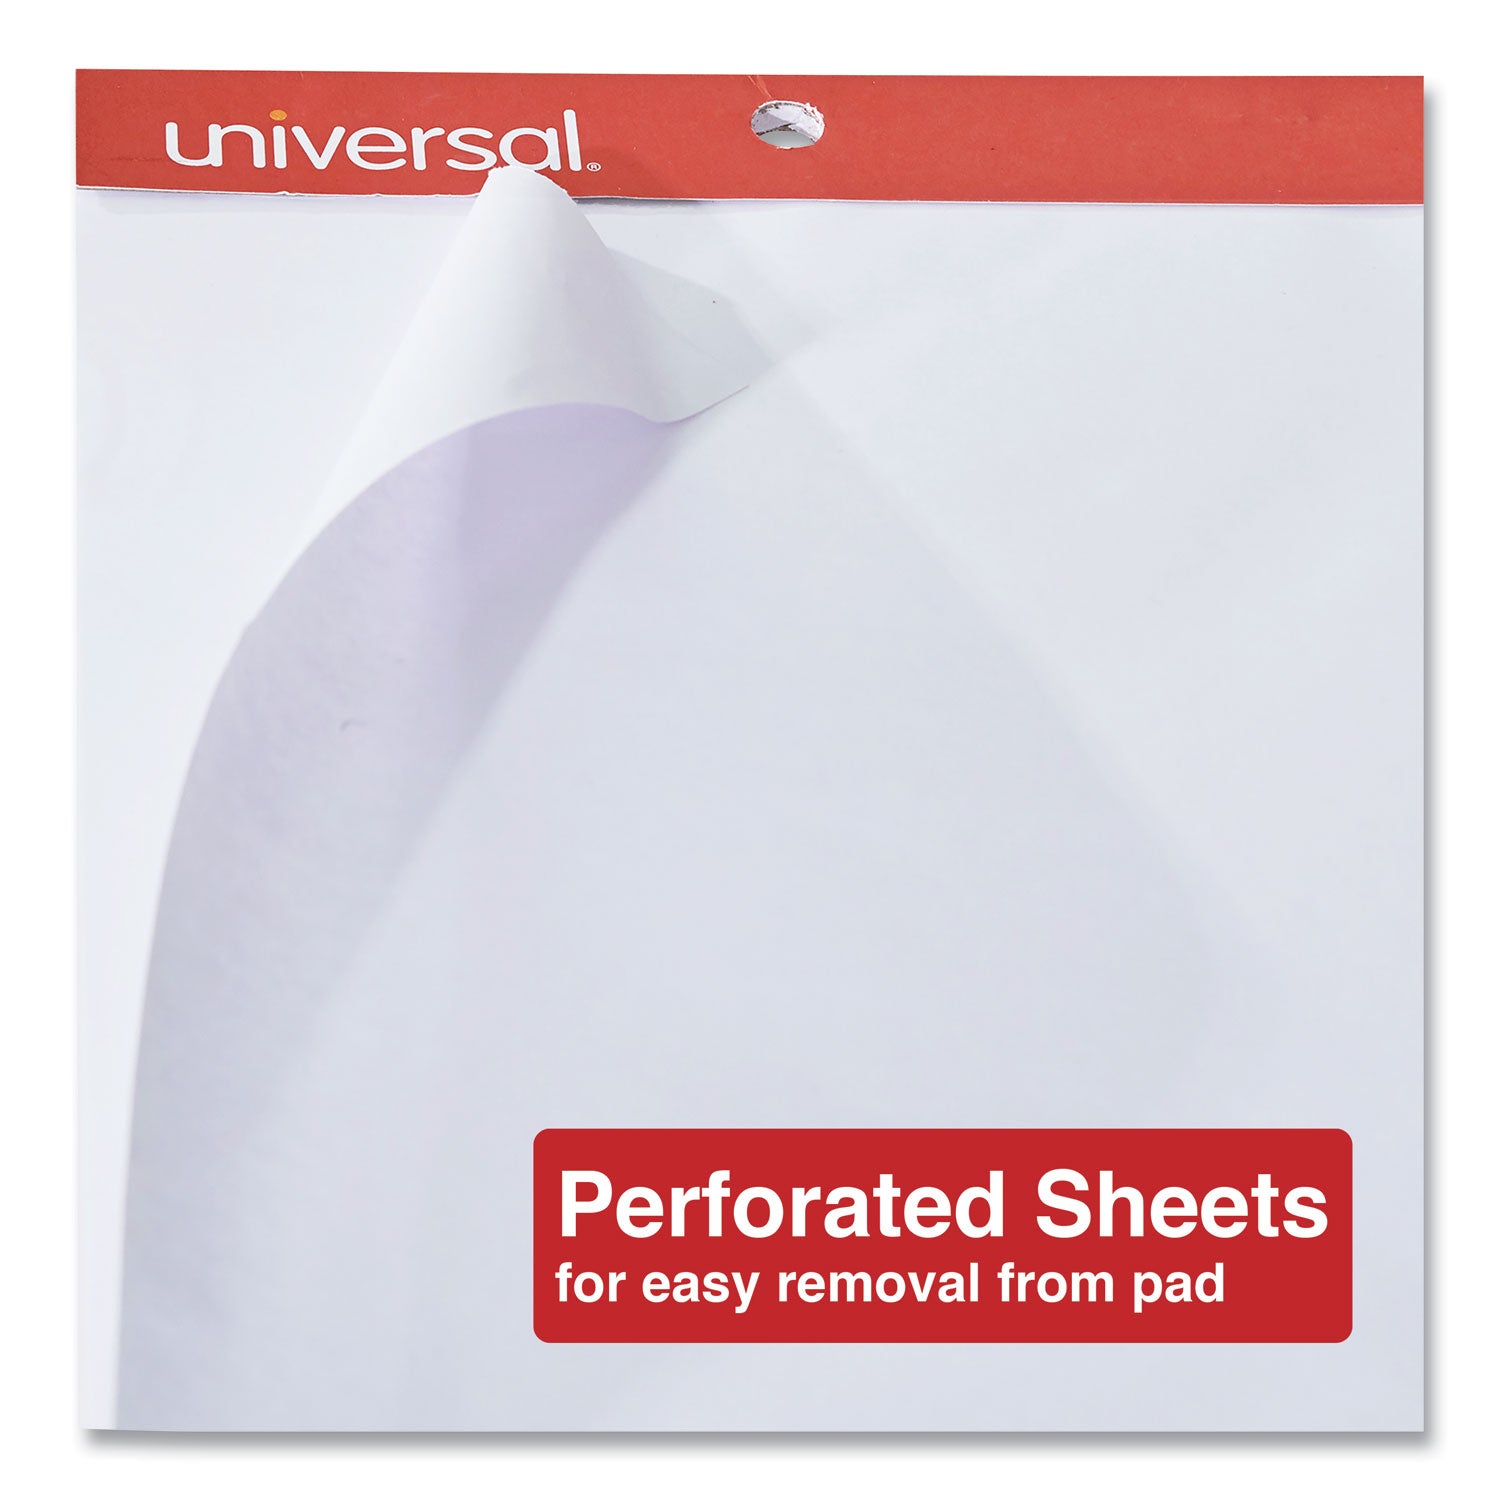 Easel Pads/Flip Charts, Unruled, 27 x 34, White, 50 Sheets, 2/Carton - 